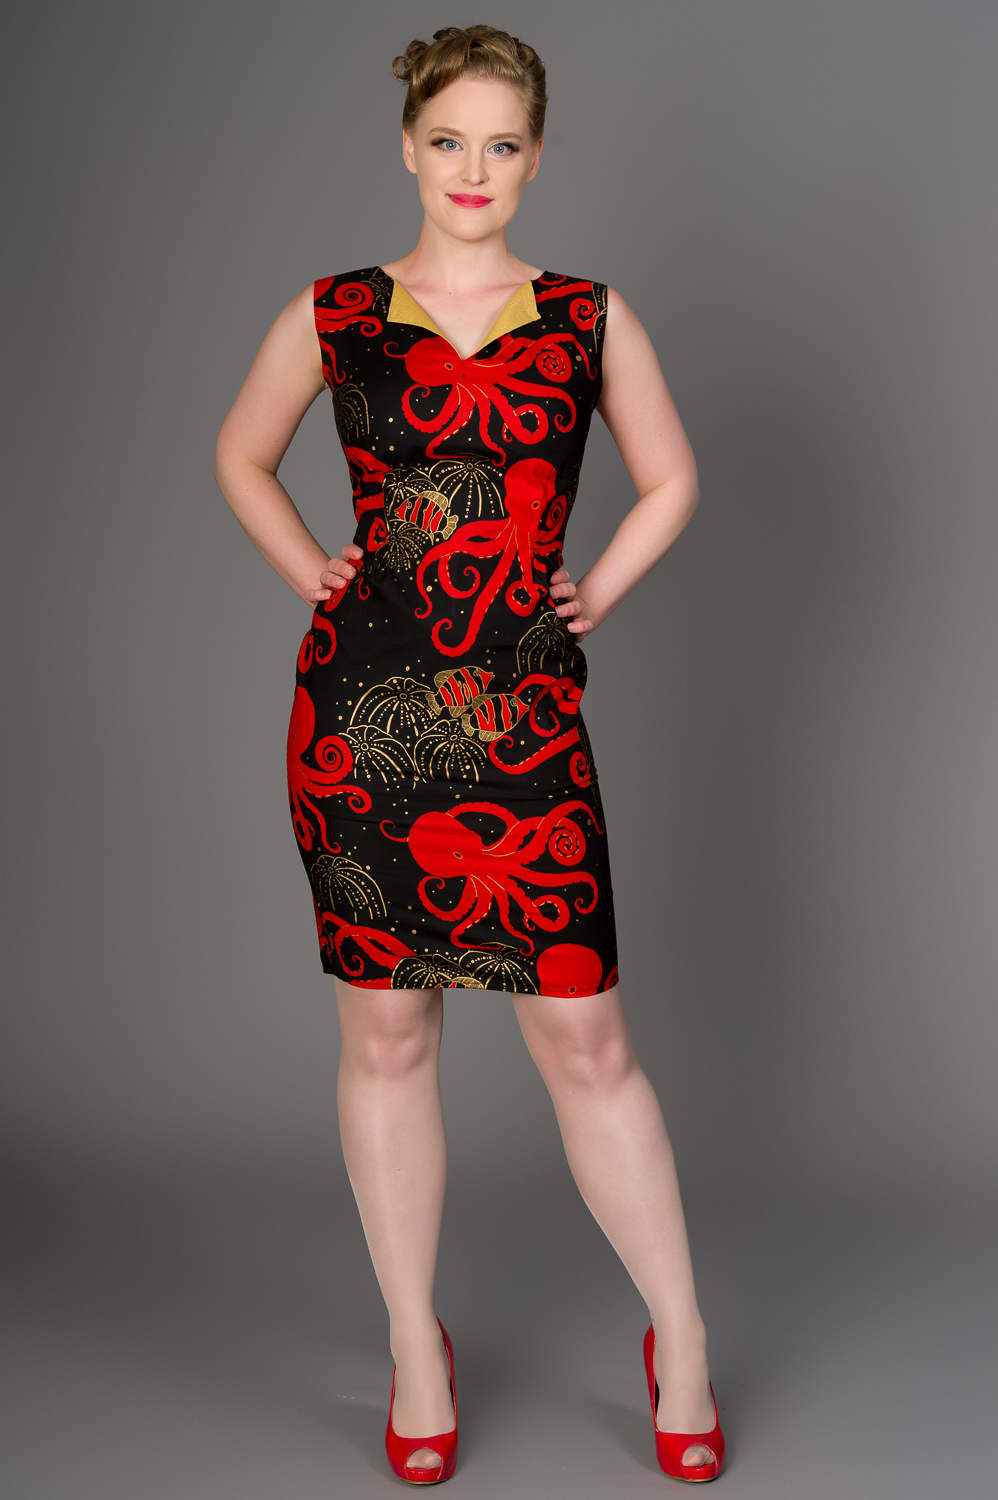  victory parade dresses for occasions A print for every personality with a style for every bodysha